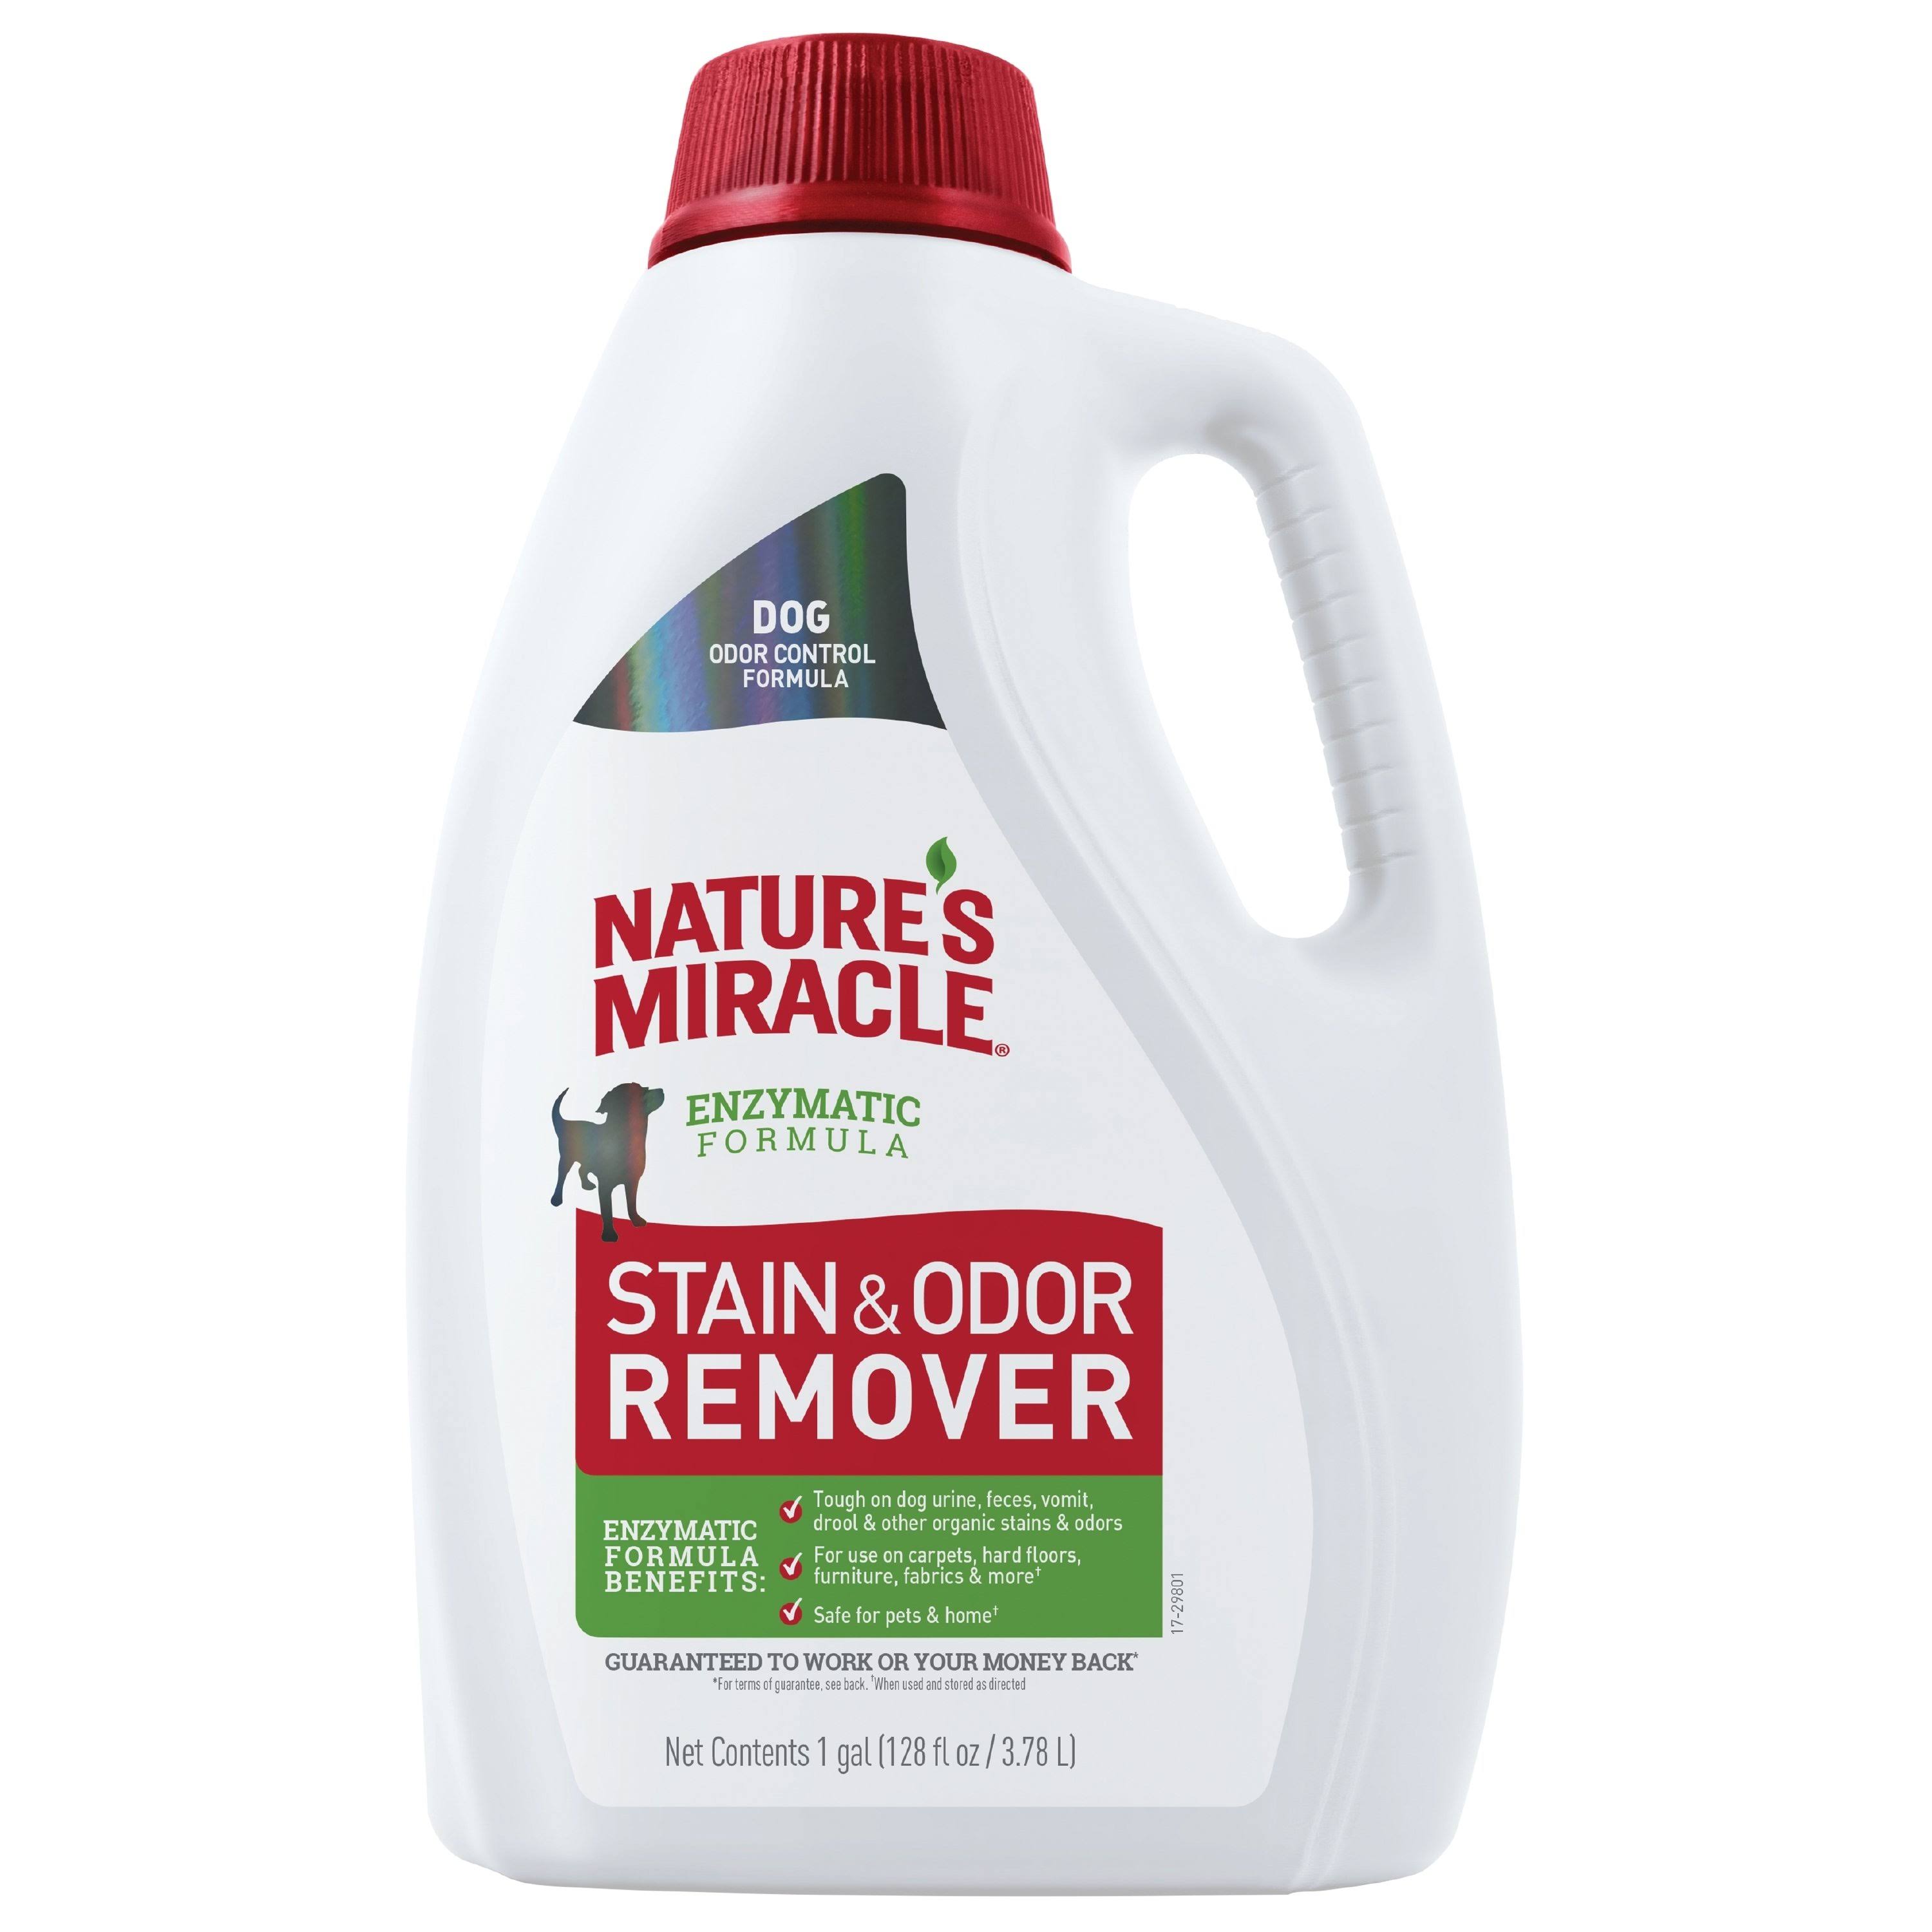 Nature's Miracle Stain & Odor Remover (1 Gallon)